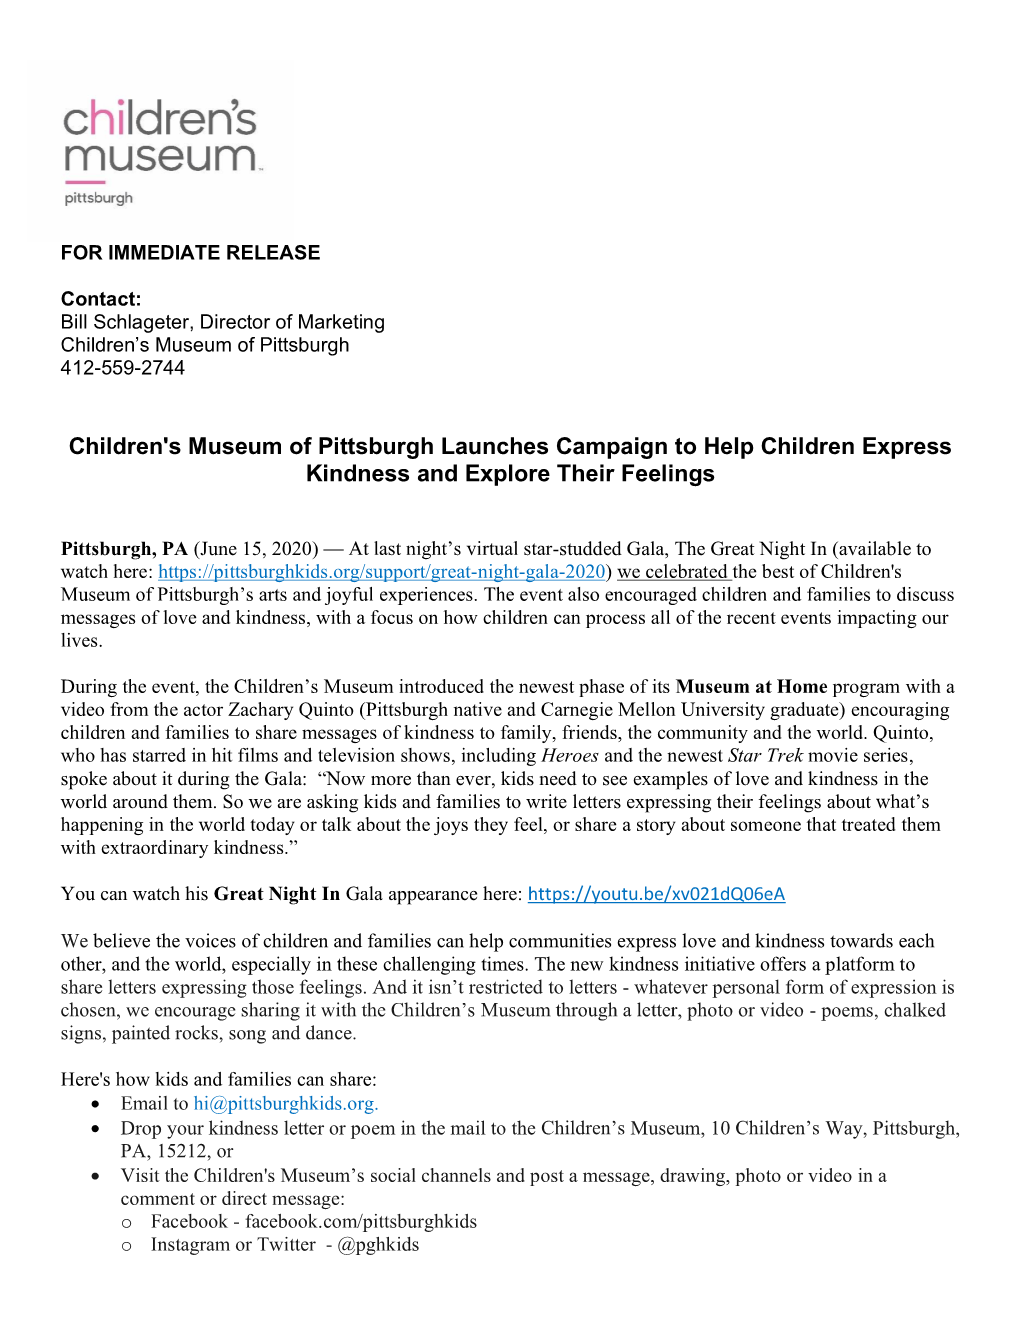 Children's Museum of Pittsburgh Launches Campaign to Help Children Express Kindness and Explore Their Feelings